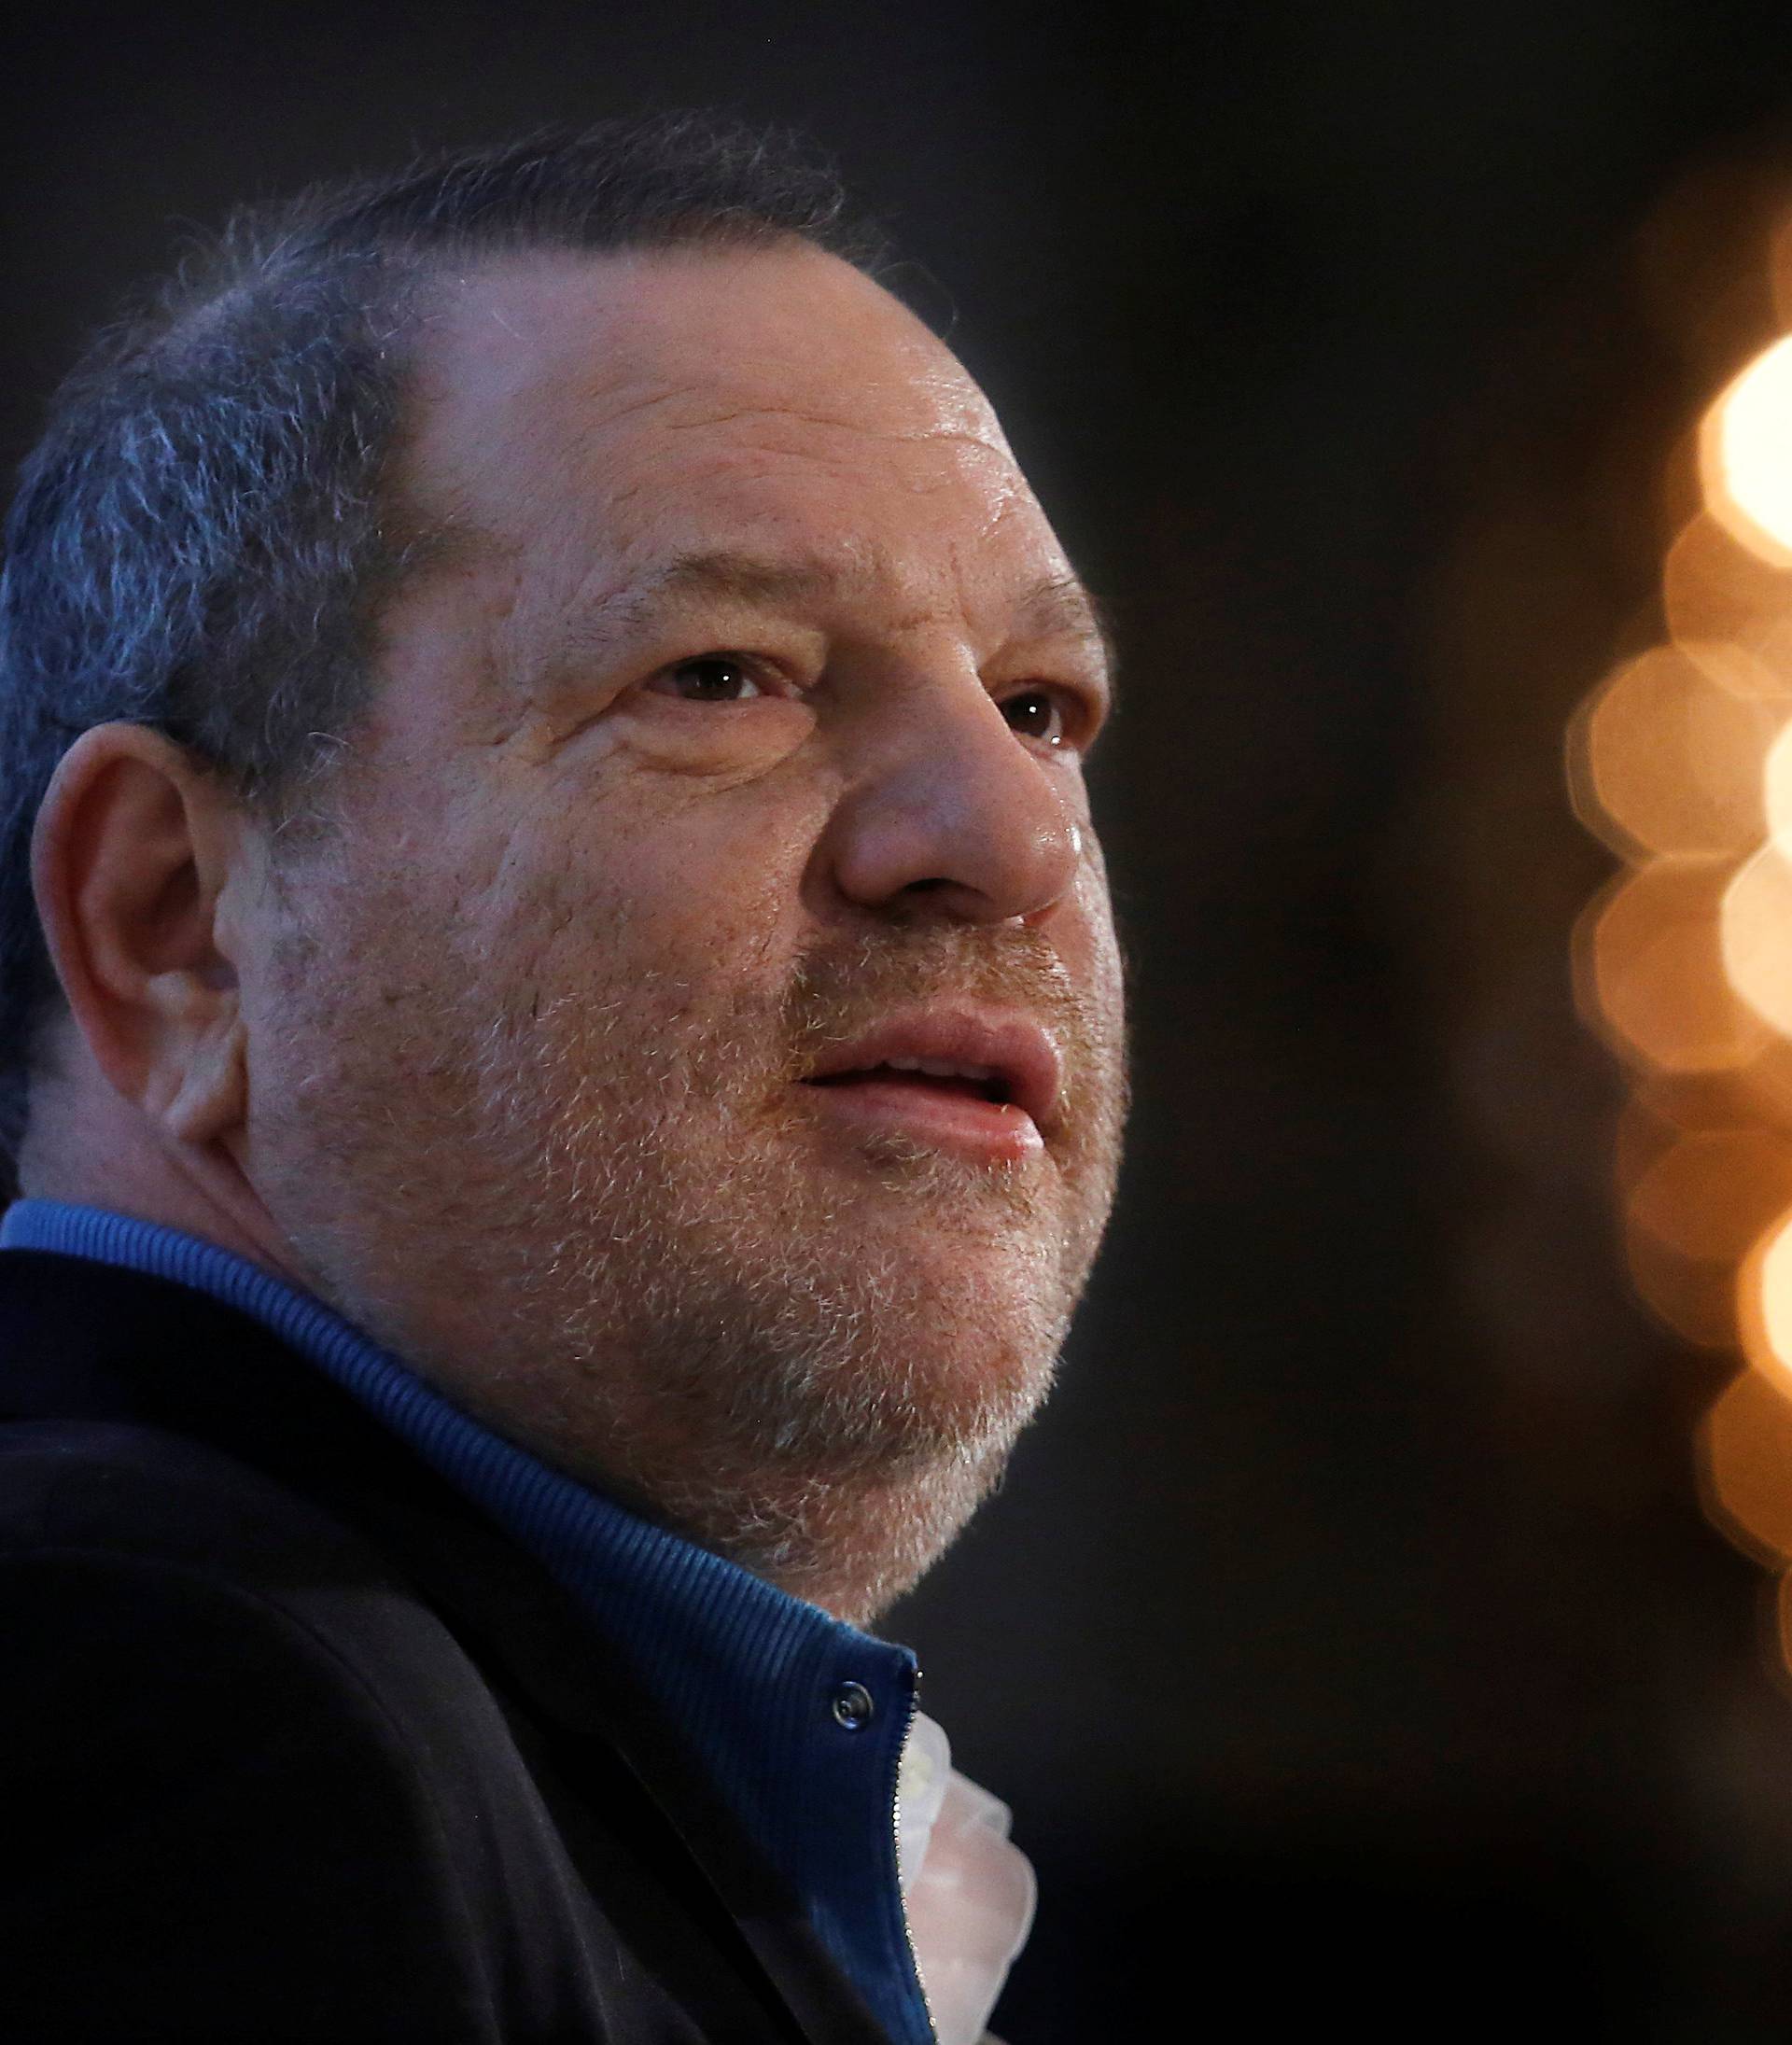 FILE PHOTO: Harvey Weinstein speaks at the UBS 40th Annual Global Media and Communications Conference in New York